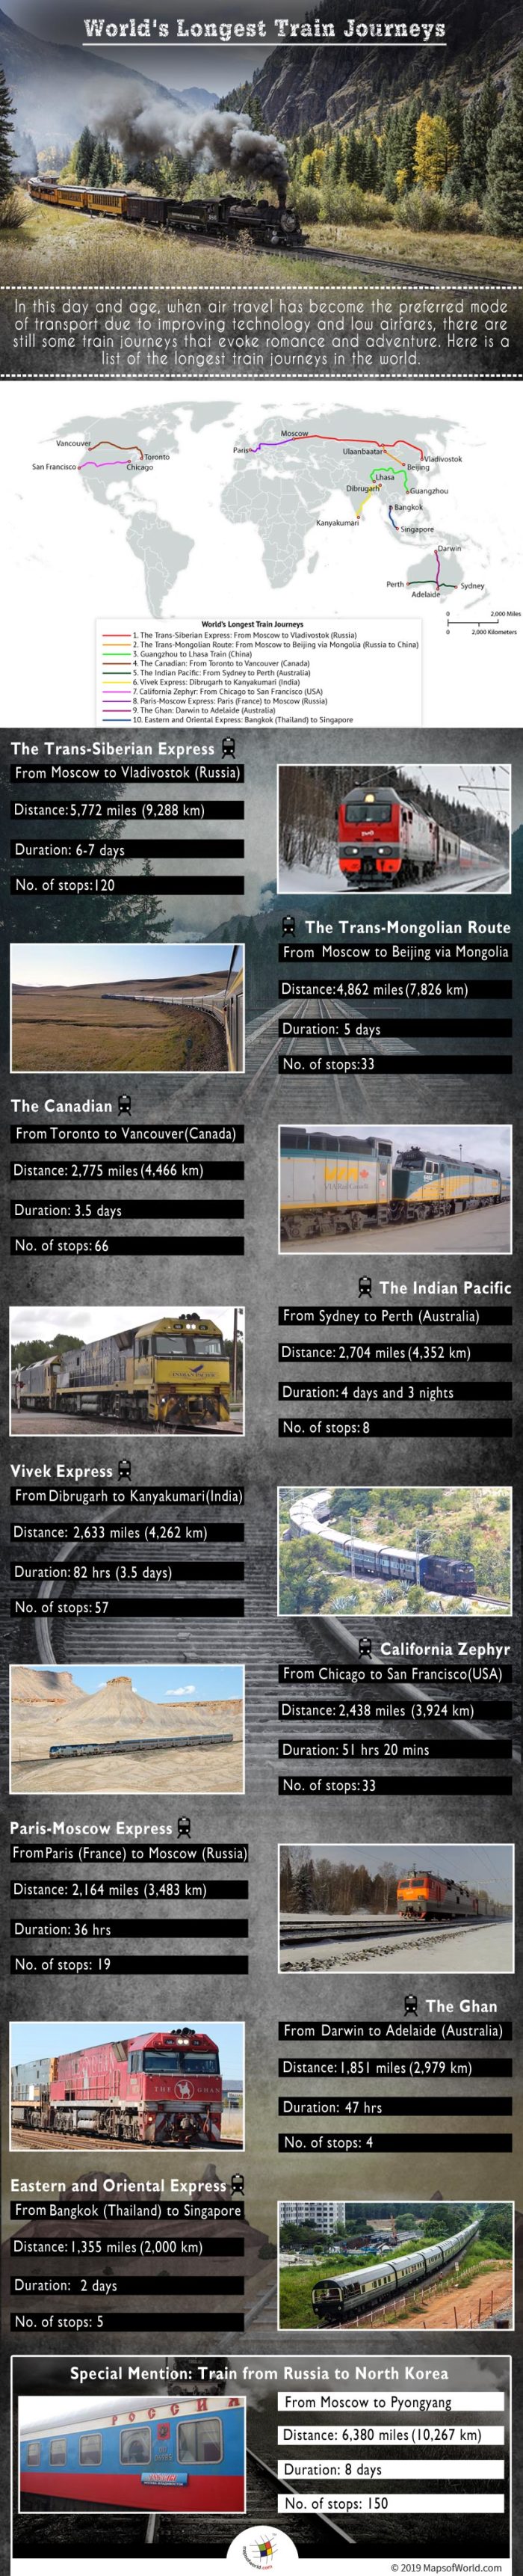 Infographic Giving Details on The World's Longest Train Journeys